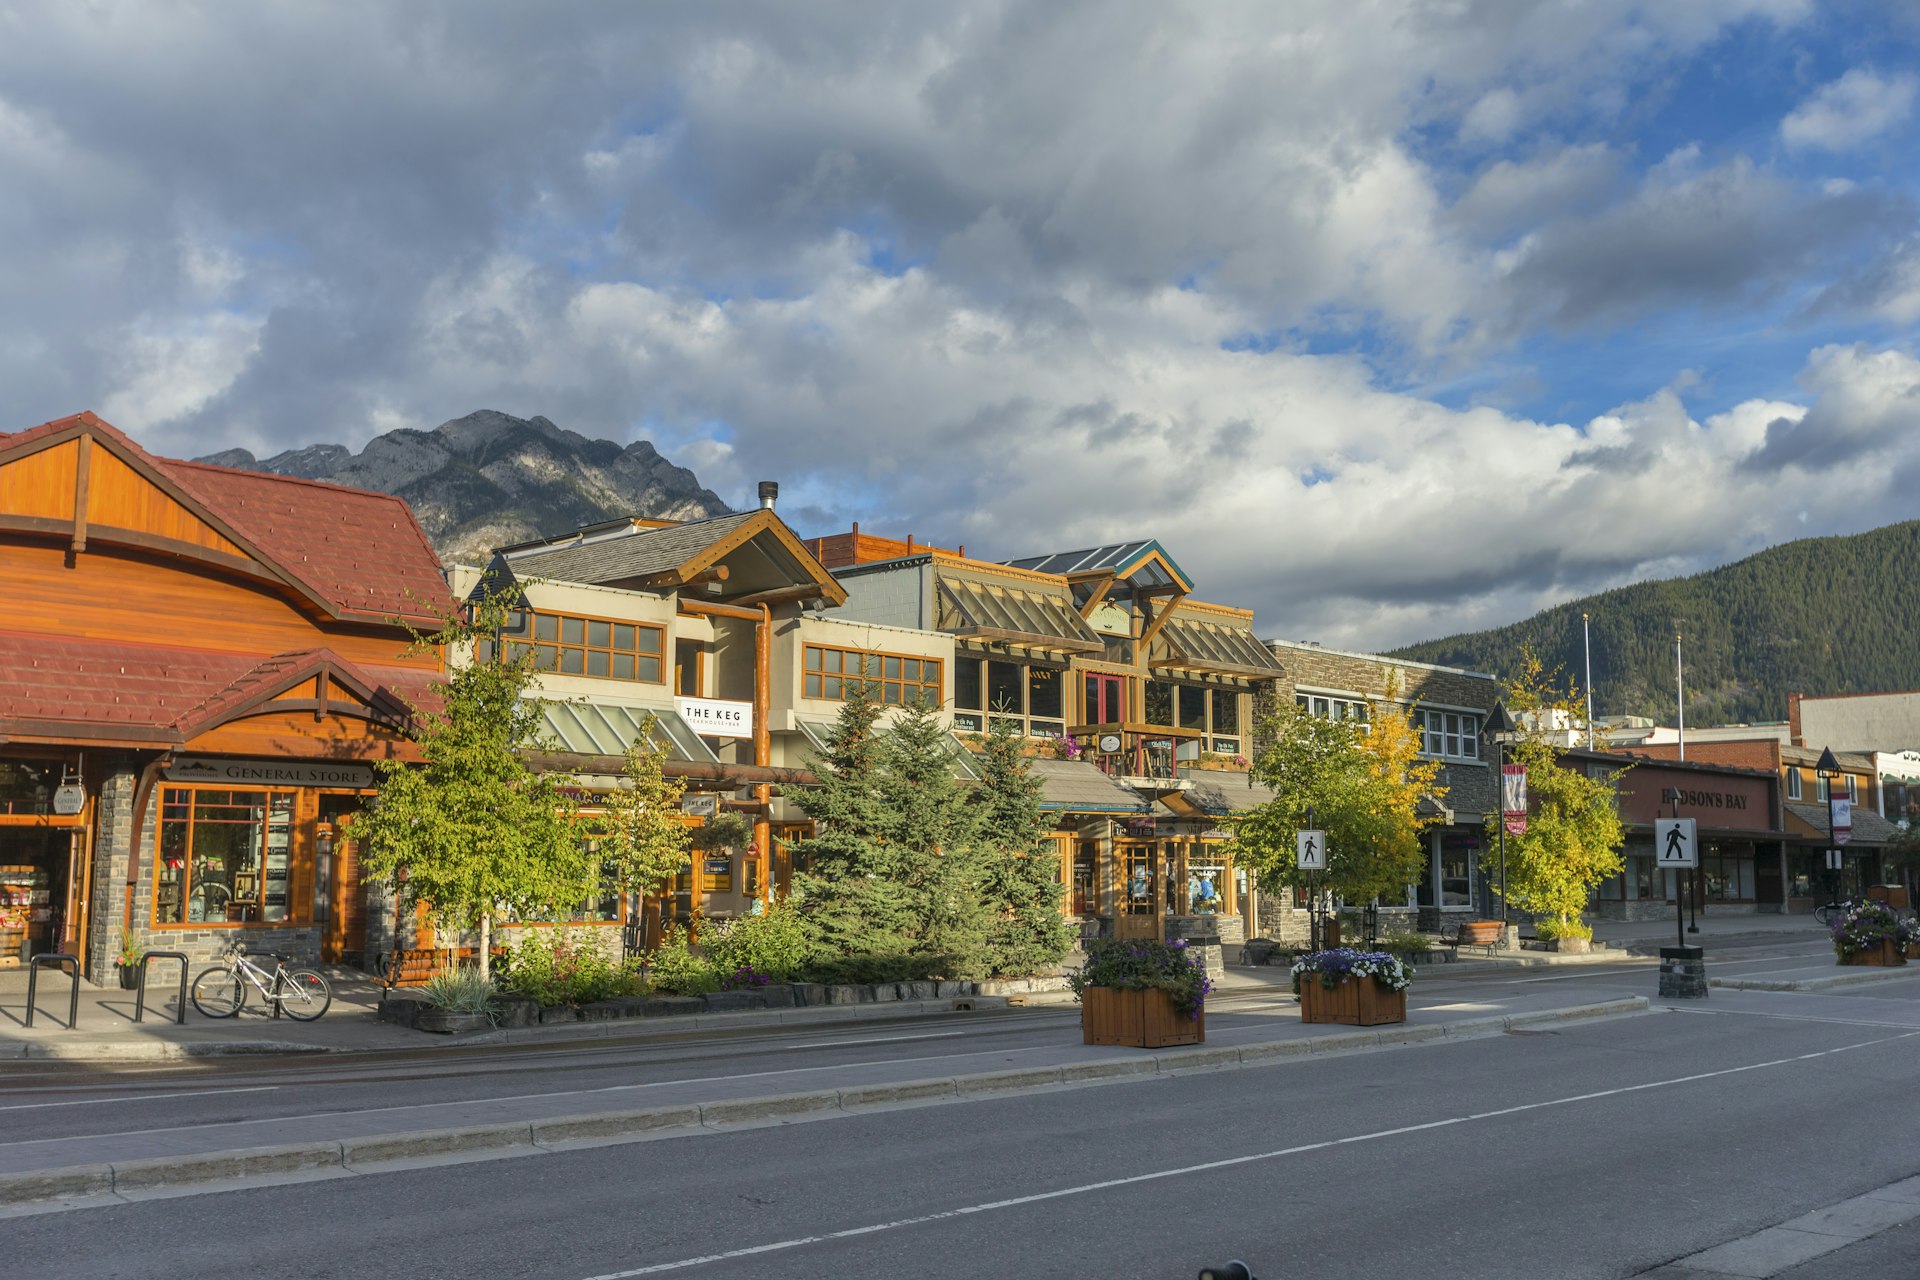 Downtown Streets of Banff National Park Canada